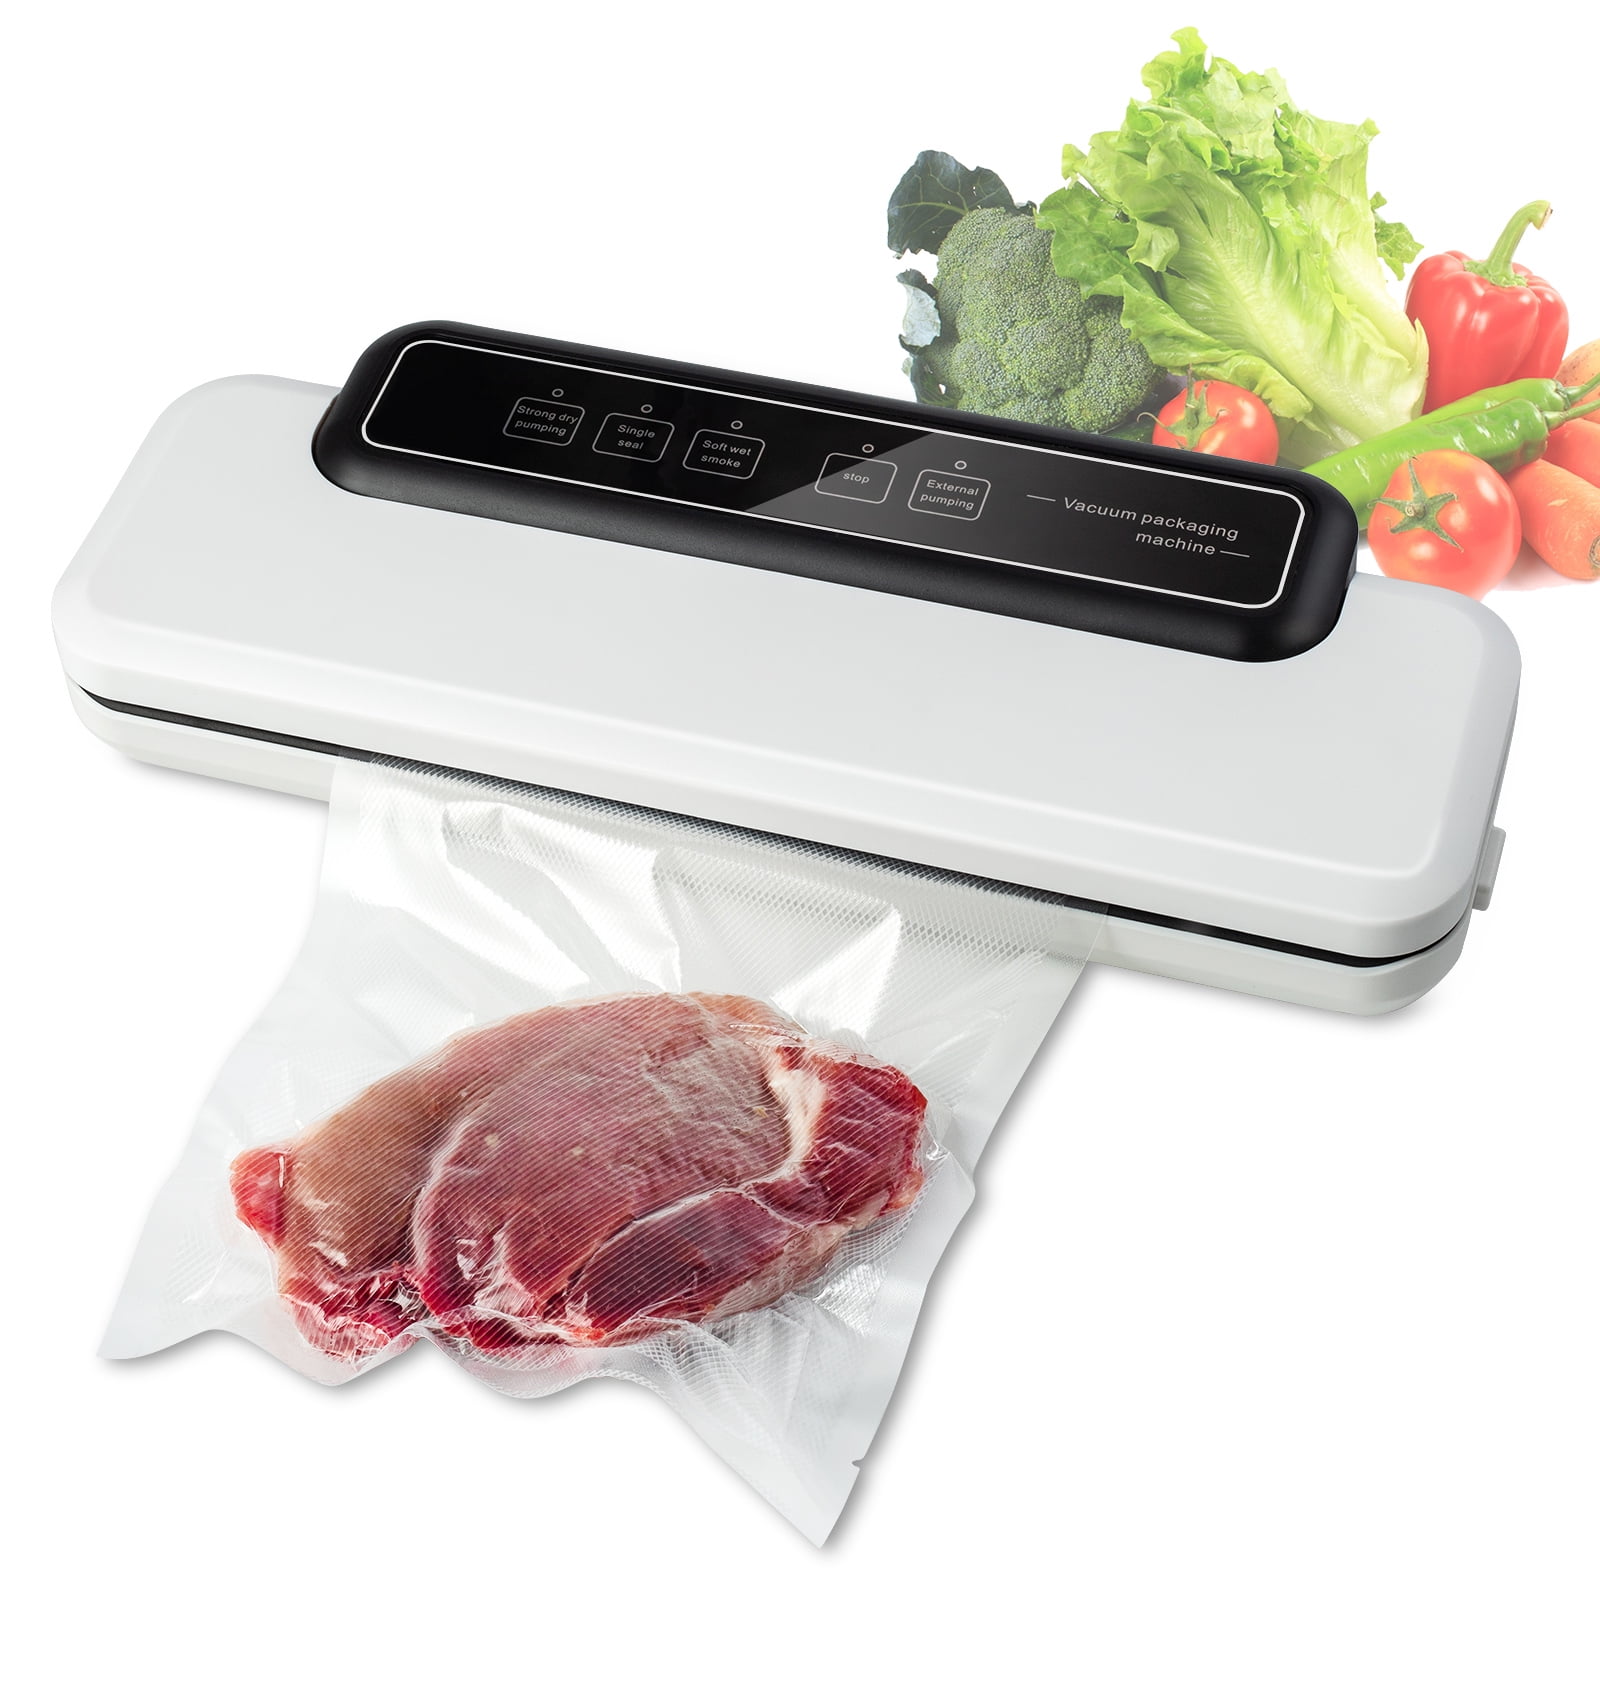 Details about   Commercial Vacuum Sealer Machine Seal a Meal Food Saver System with 10 Free Bags 